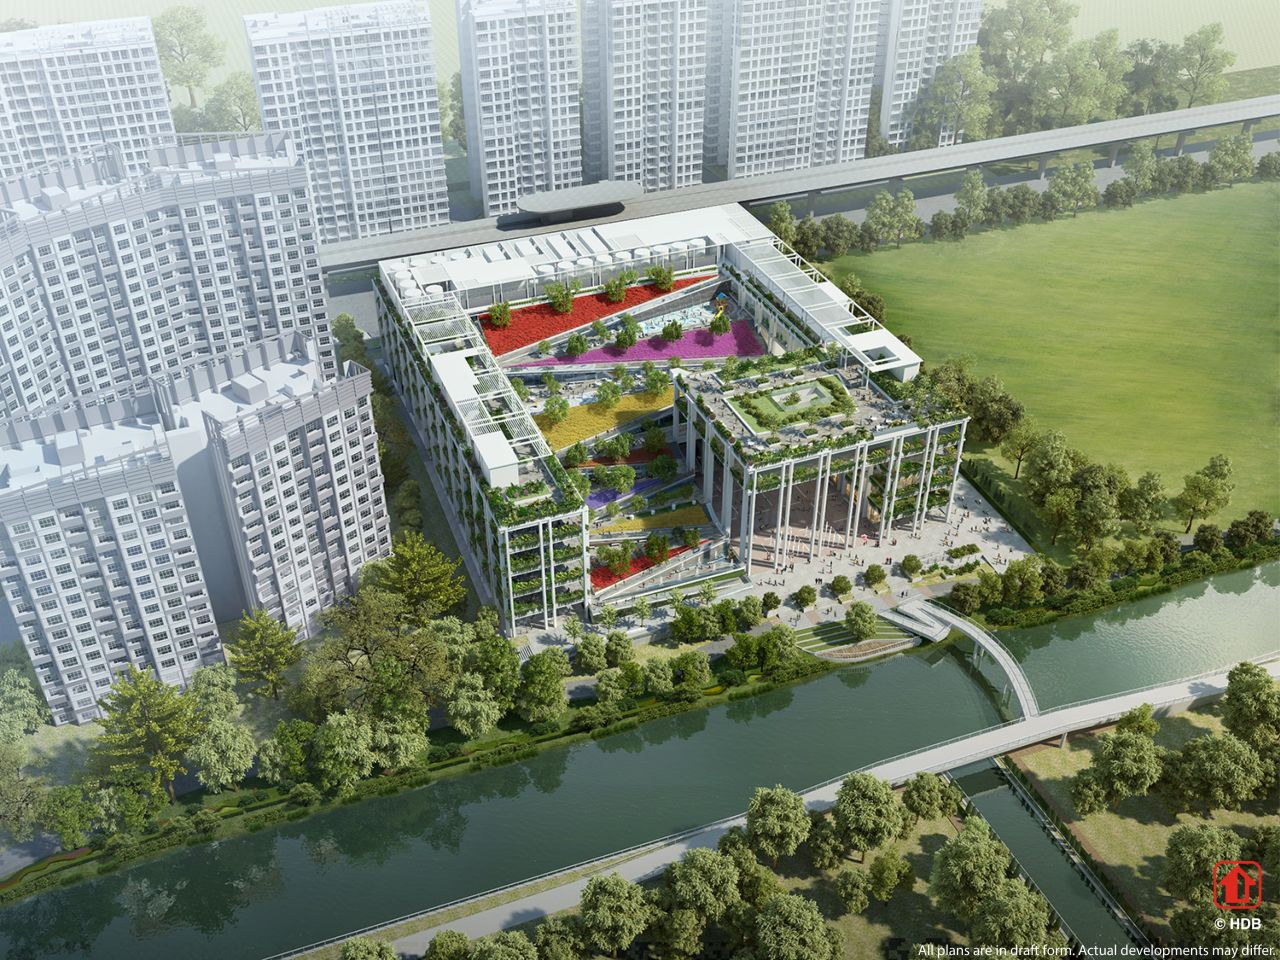 Like Northshore Plaza, Oasis Terraces will also include access to an MRT station. It was designed after a public consultation program to see what people wanted most. A dedicated pedestrian thoroughfare will give residents direct access to the waterway. It's expected to be completed in 2018.